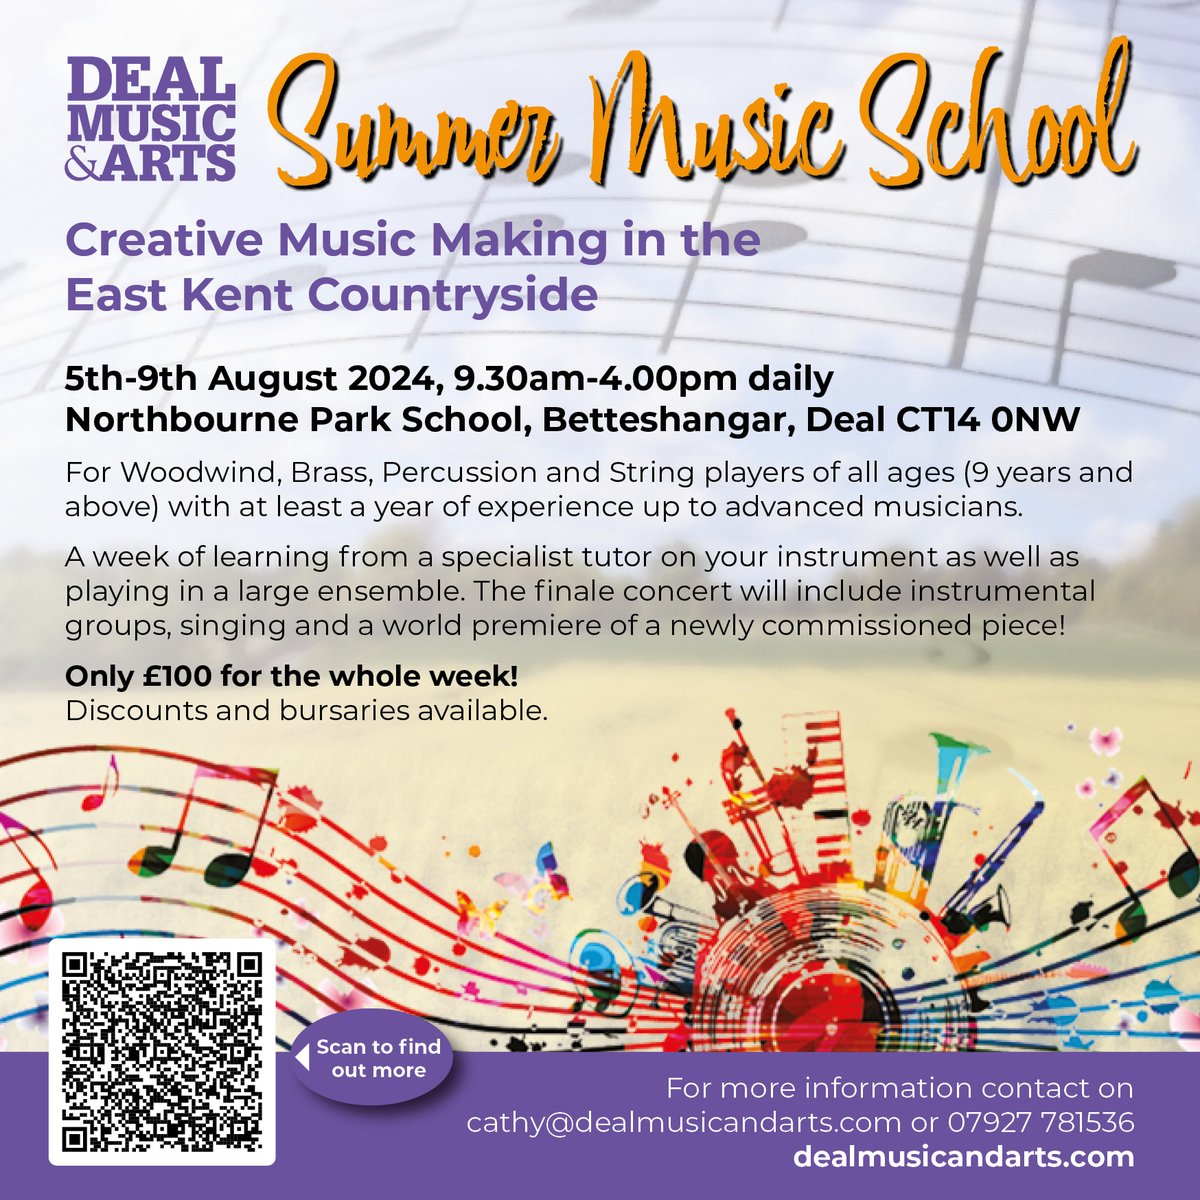 Our popular summer school returns to the beautiful setting of @NorthbournePark 5th-9th August. For #brass #woodwind #strings and #percussion players of all ages and abilities. Learn from specialist tutors and play in an ensemble. Register for a place now dealmusicandarts.com/education/summ…